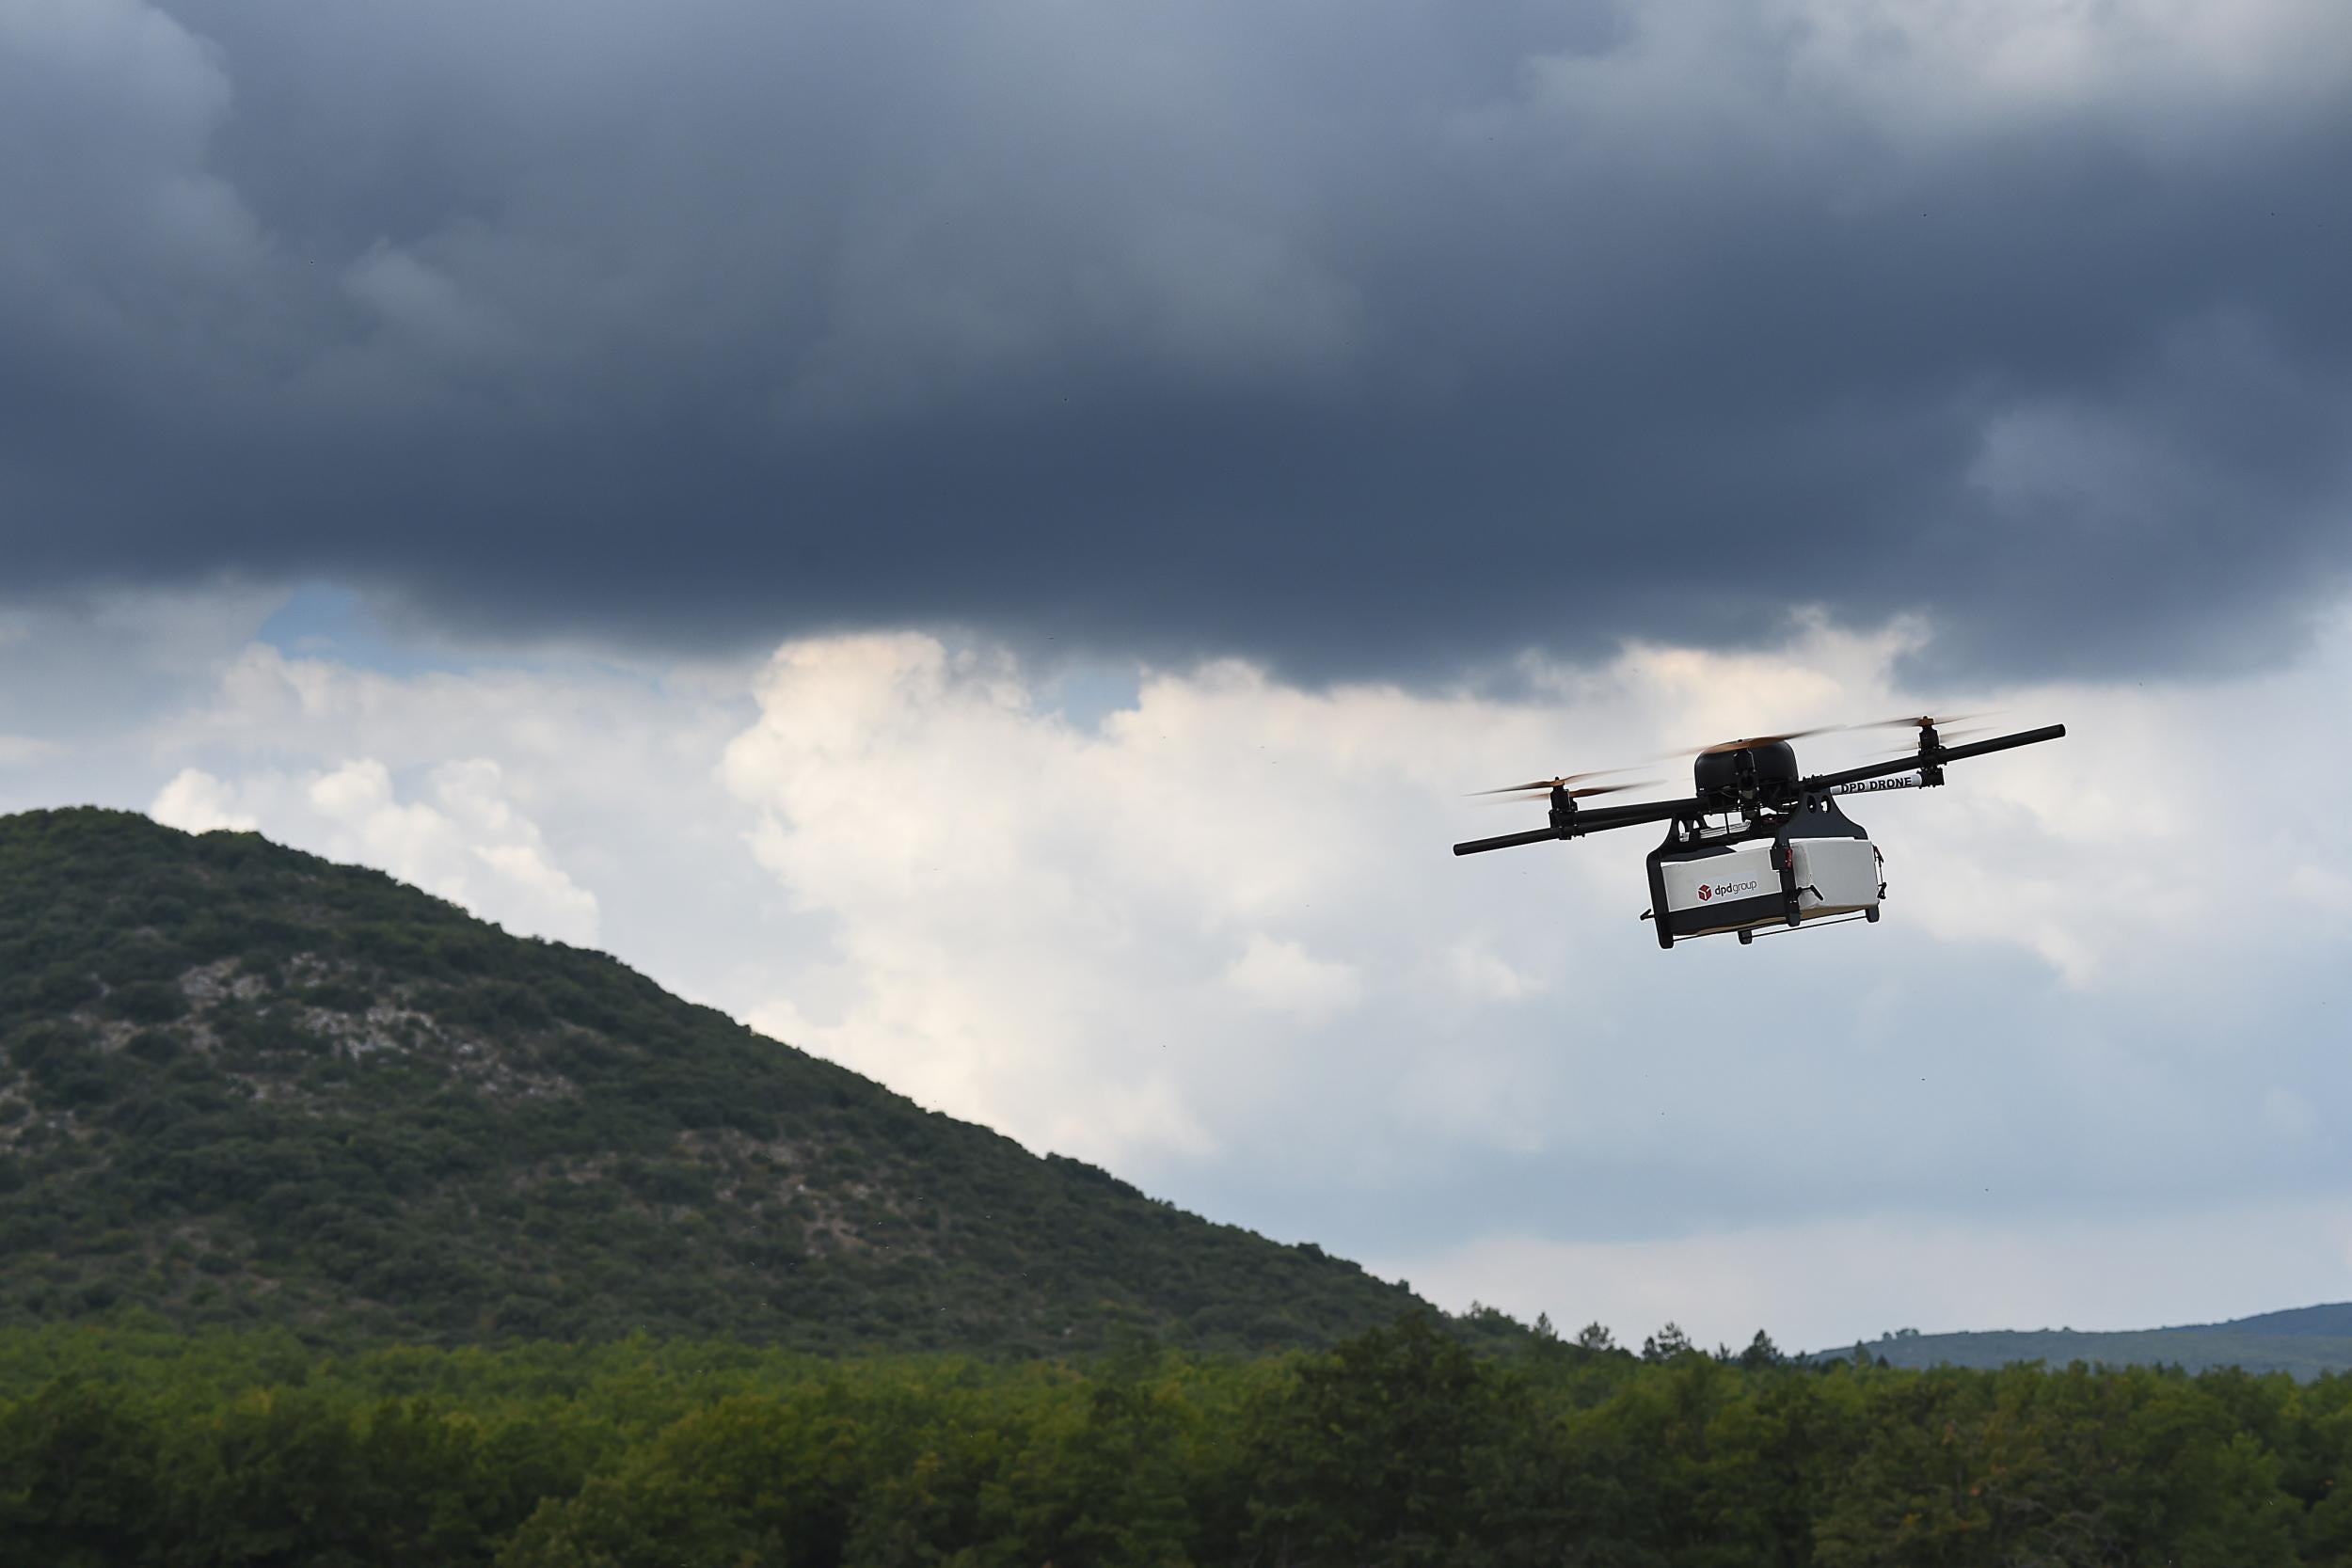 A prototype delivery drone developed by French company Geopost takes part in a test flight